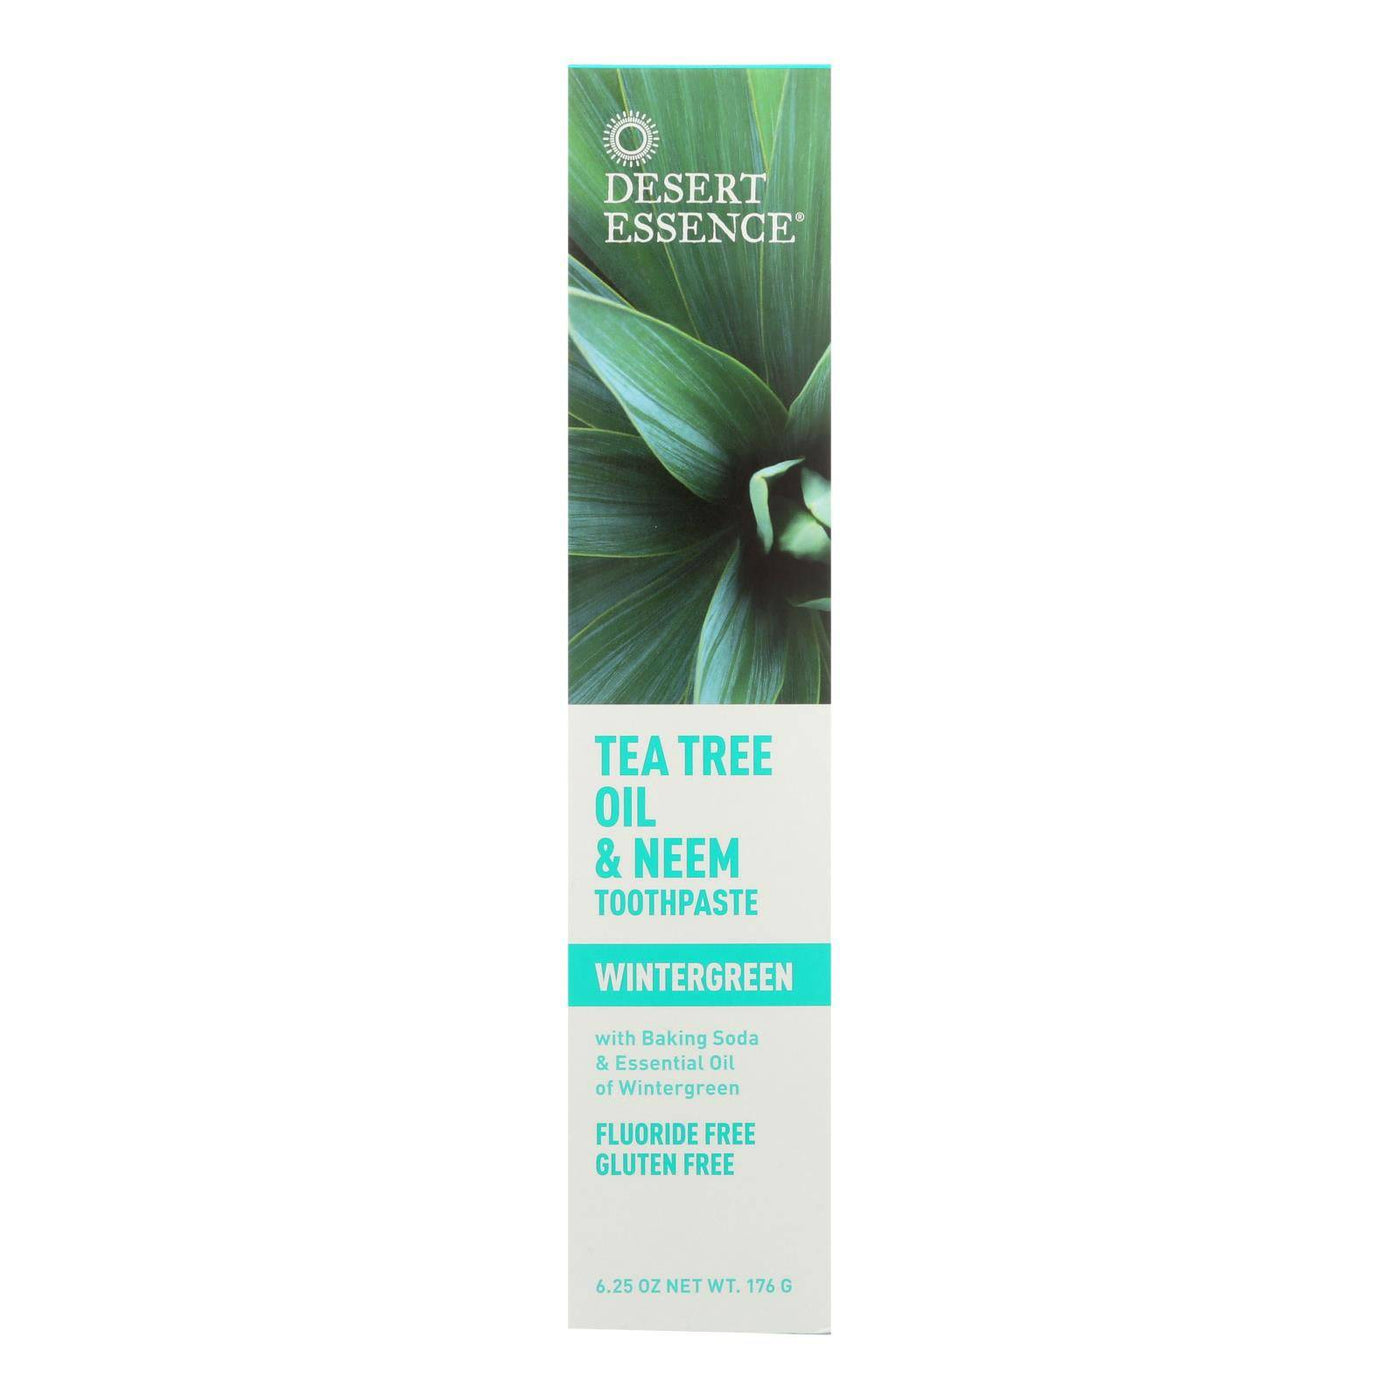 Buy Desert Essence - Natural Tea Tree Oil And Neem Toothpaste Wintergreen - 6.25 Oz  at OnlyNaturals.us